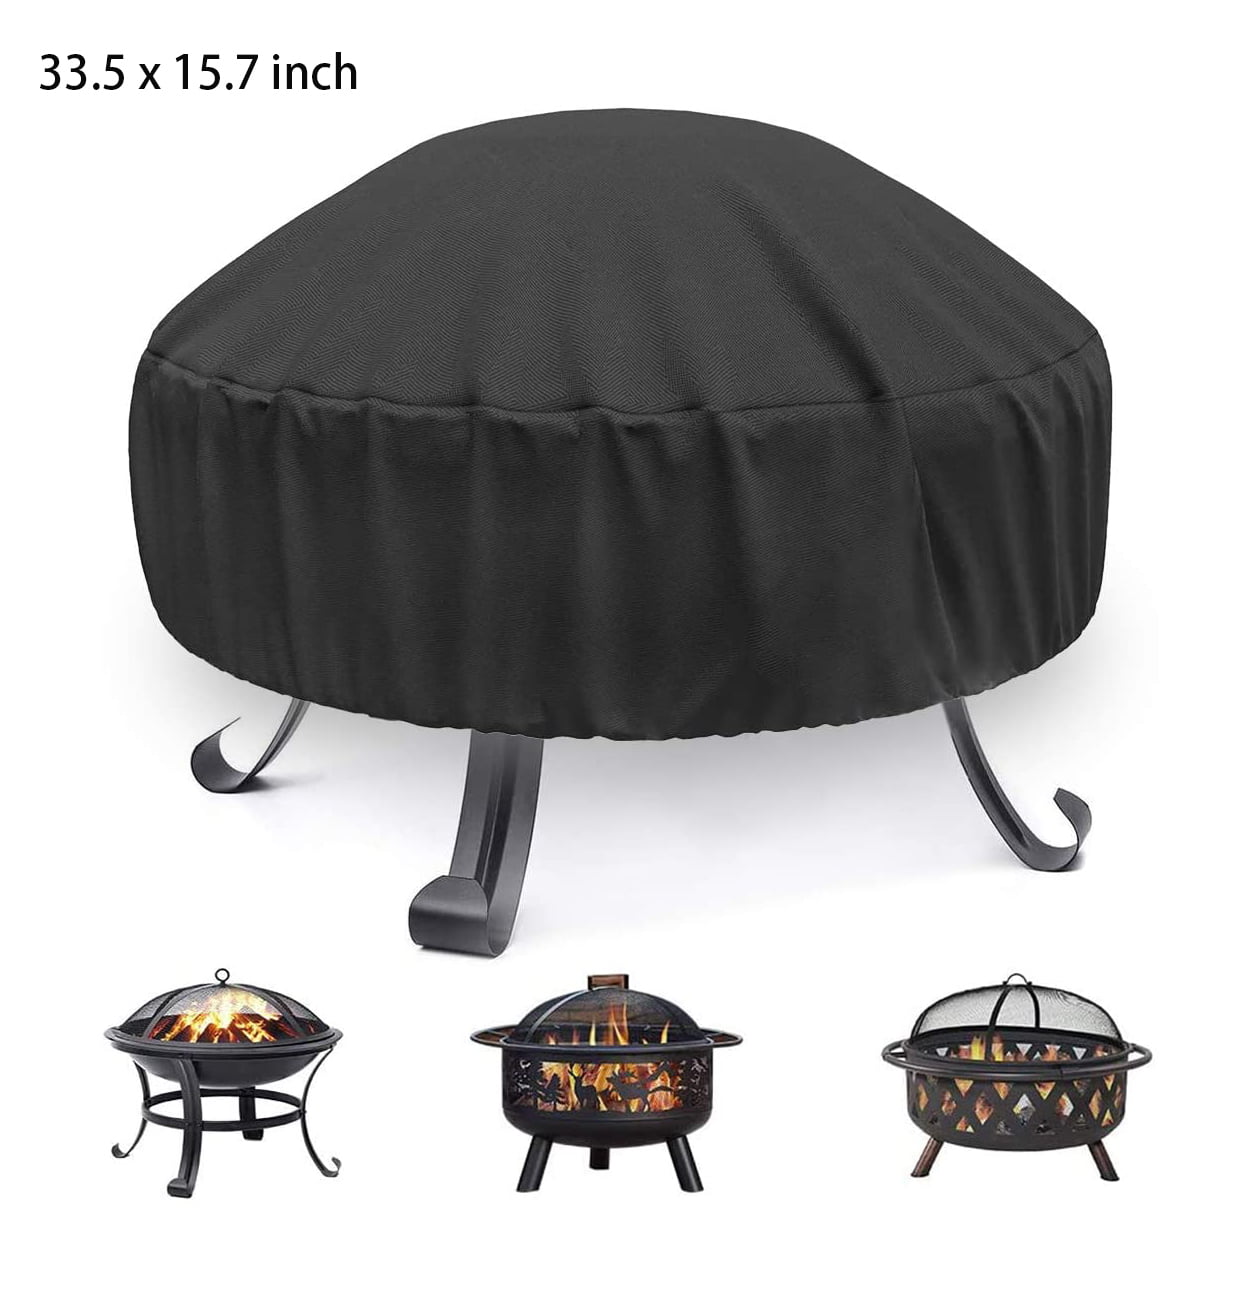 Waterproof BBQ Grill Cover Round Fire Pit Barbecue Protector Home Patio Garden A 